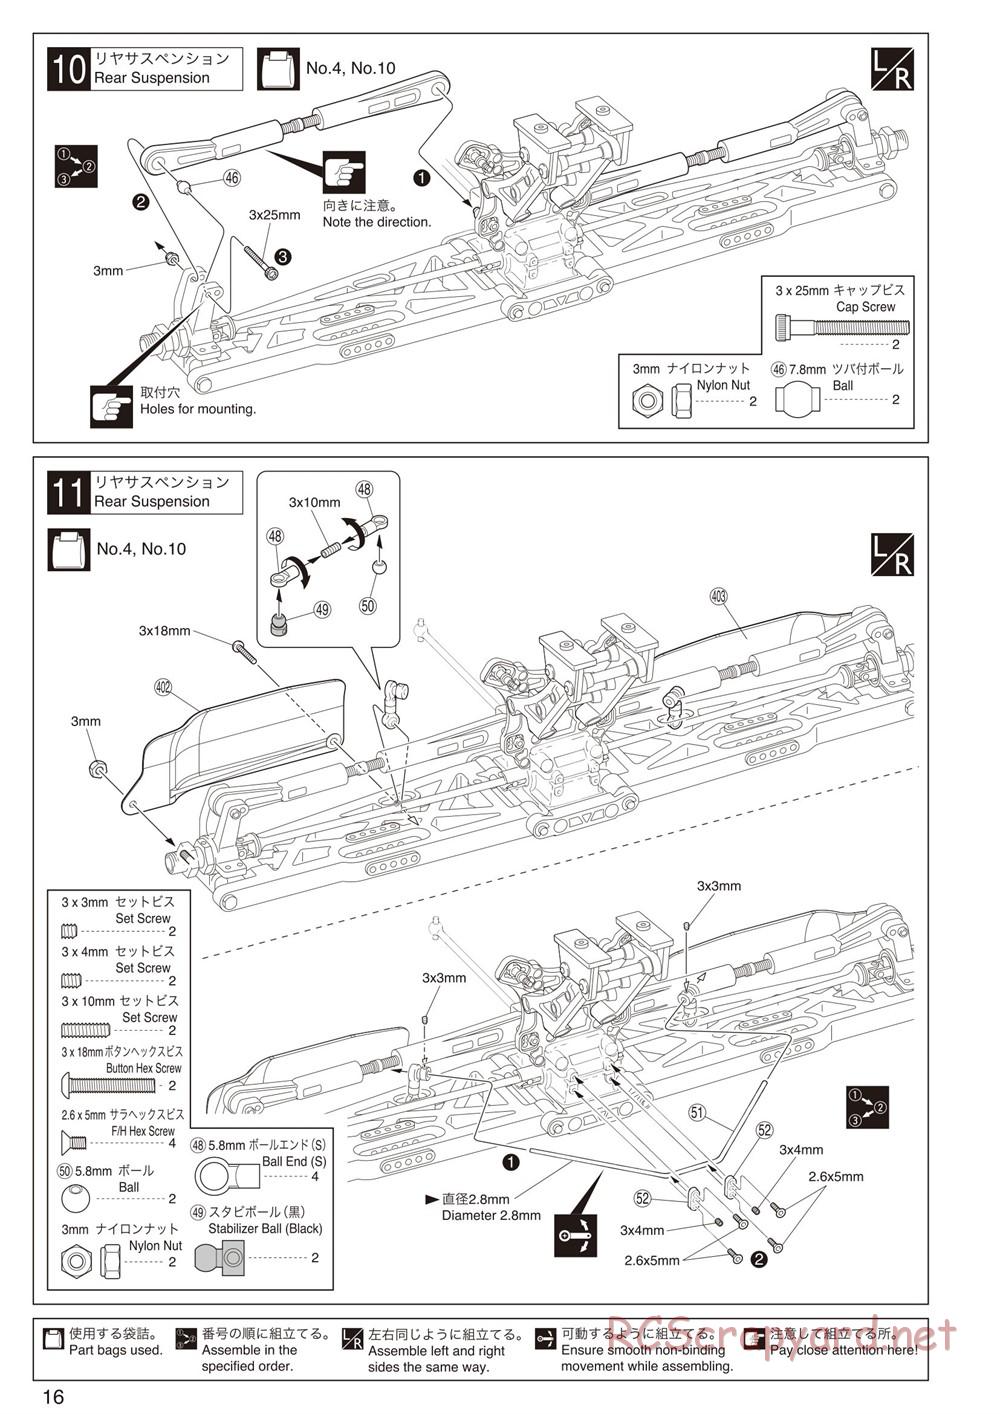 Kyosho - Inferno ST-RR Evo.2 - Manual - Page 20